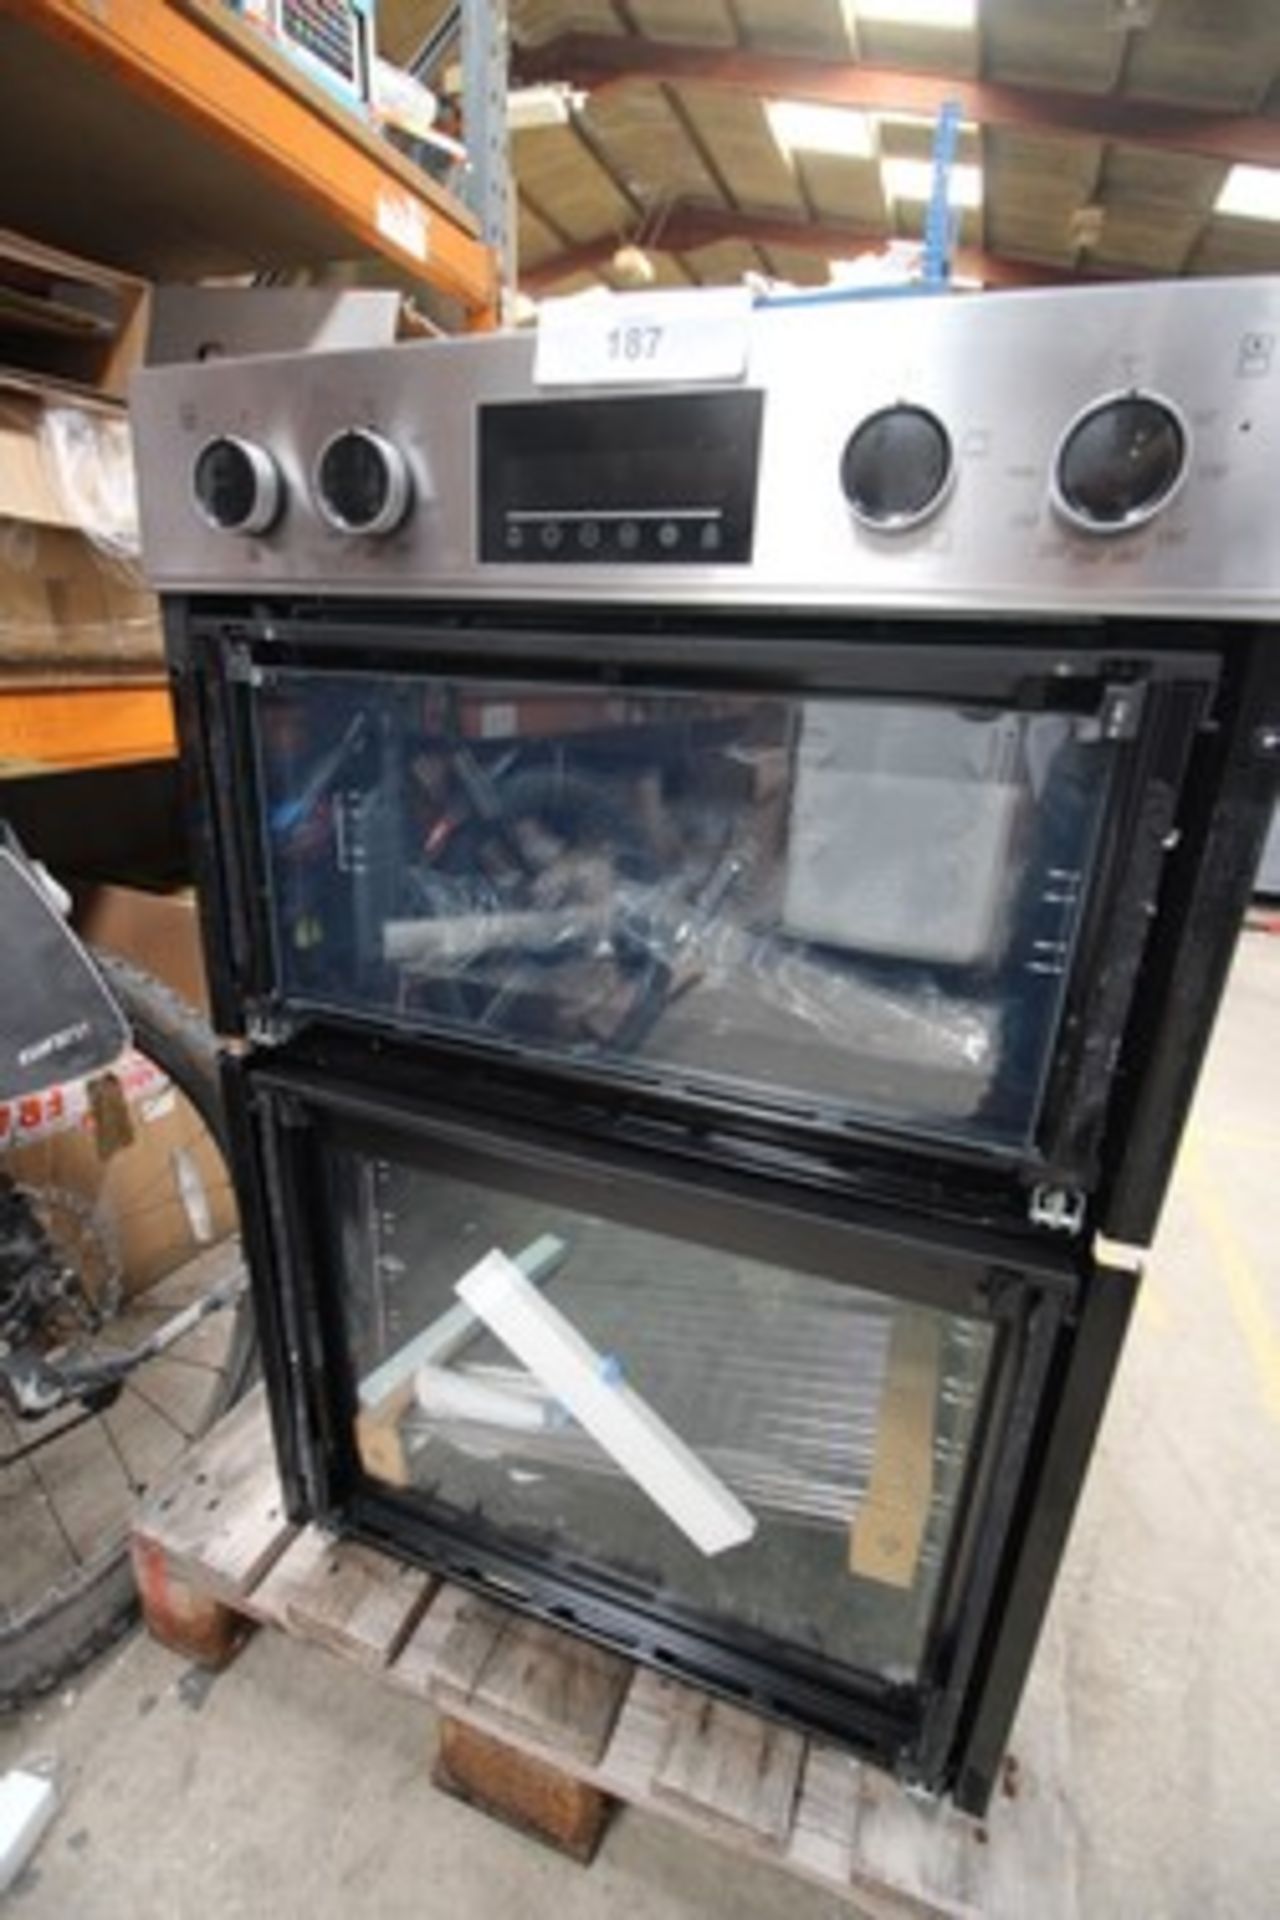 1 x Beko built in double oven, Model CDFY22309X, broken glass on both doors and small dent to top